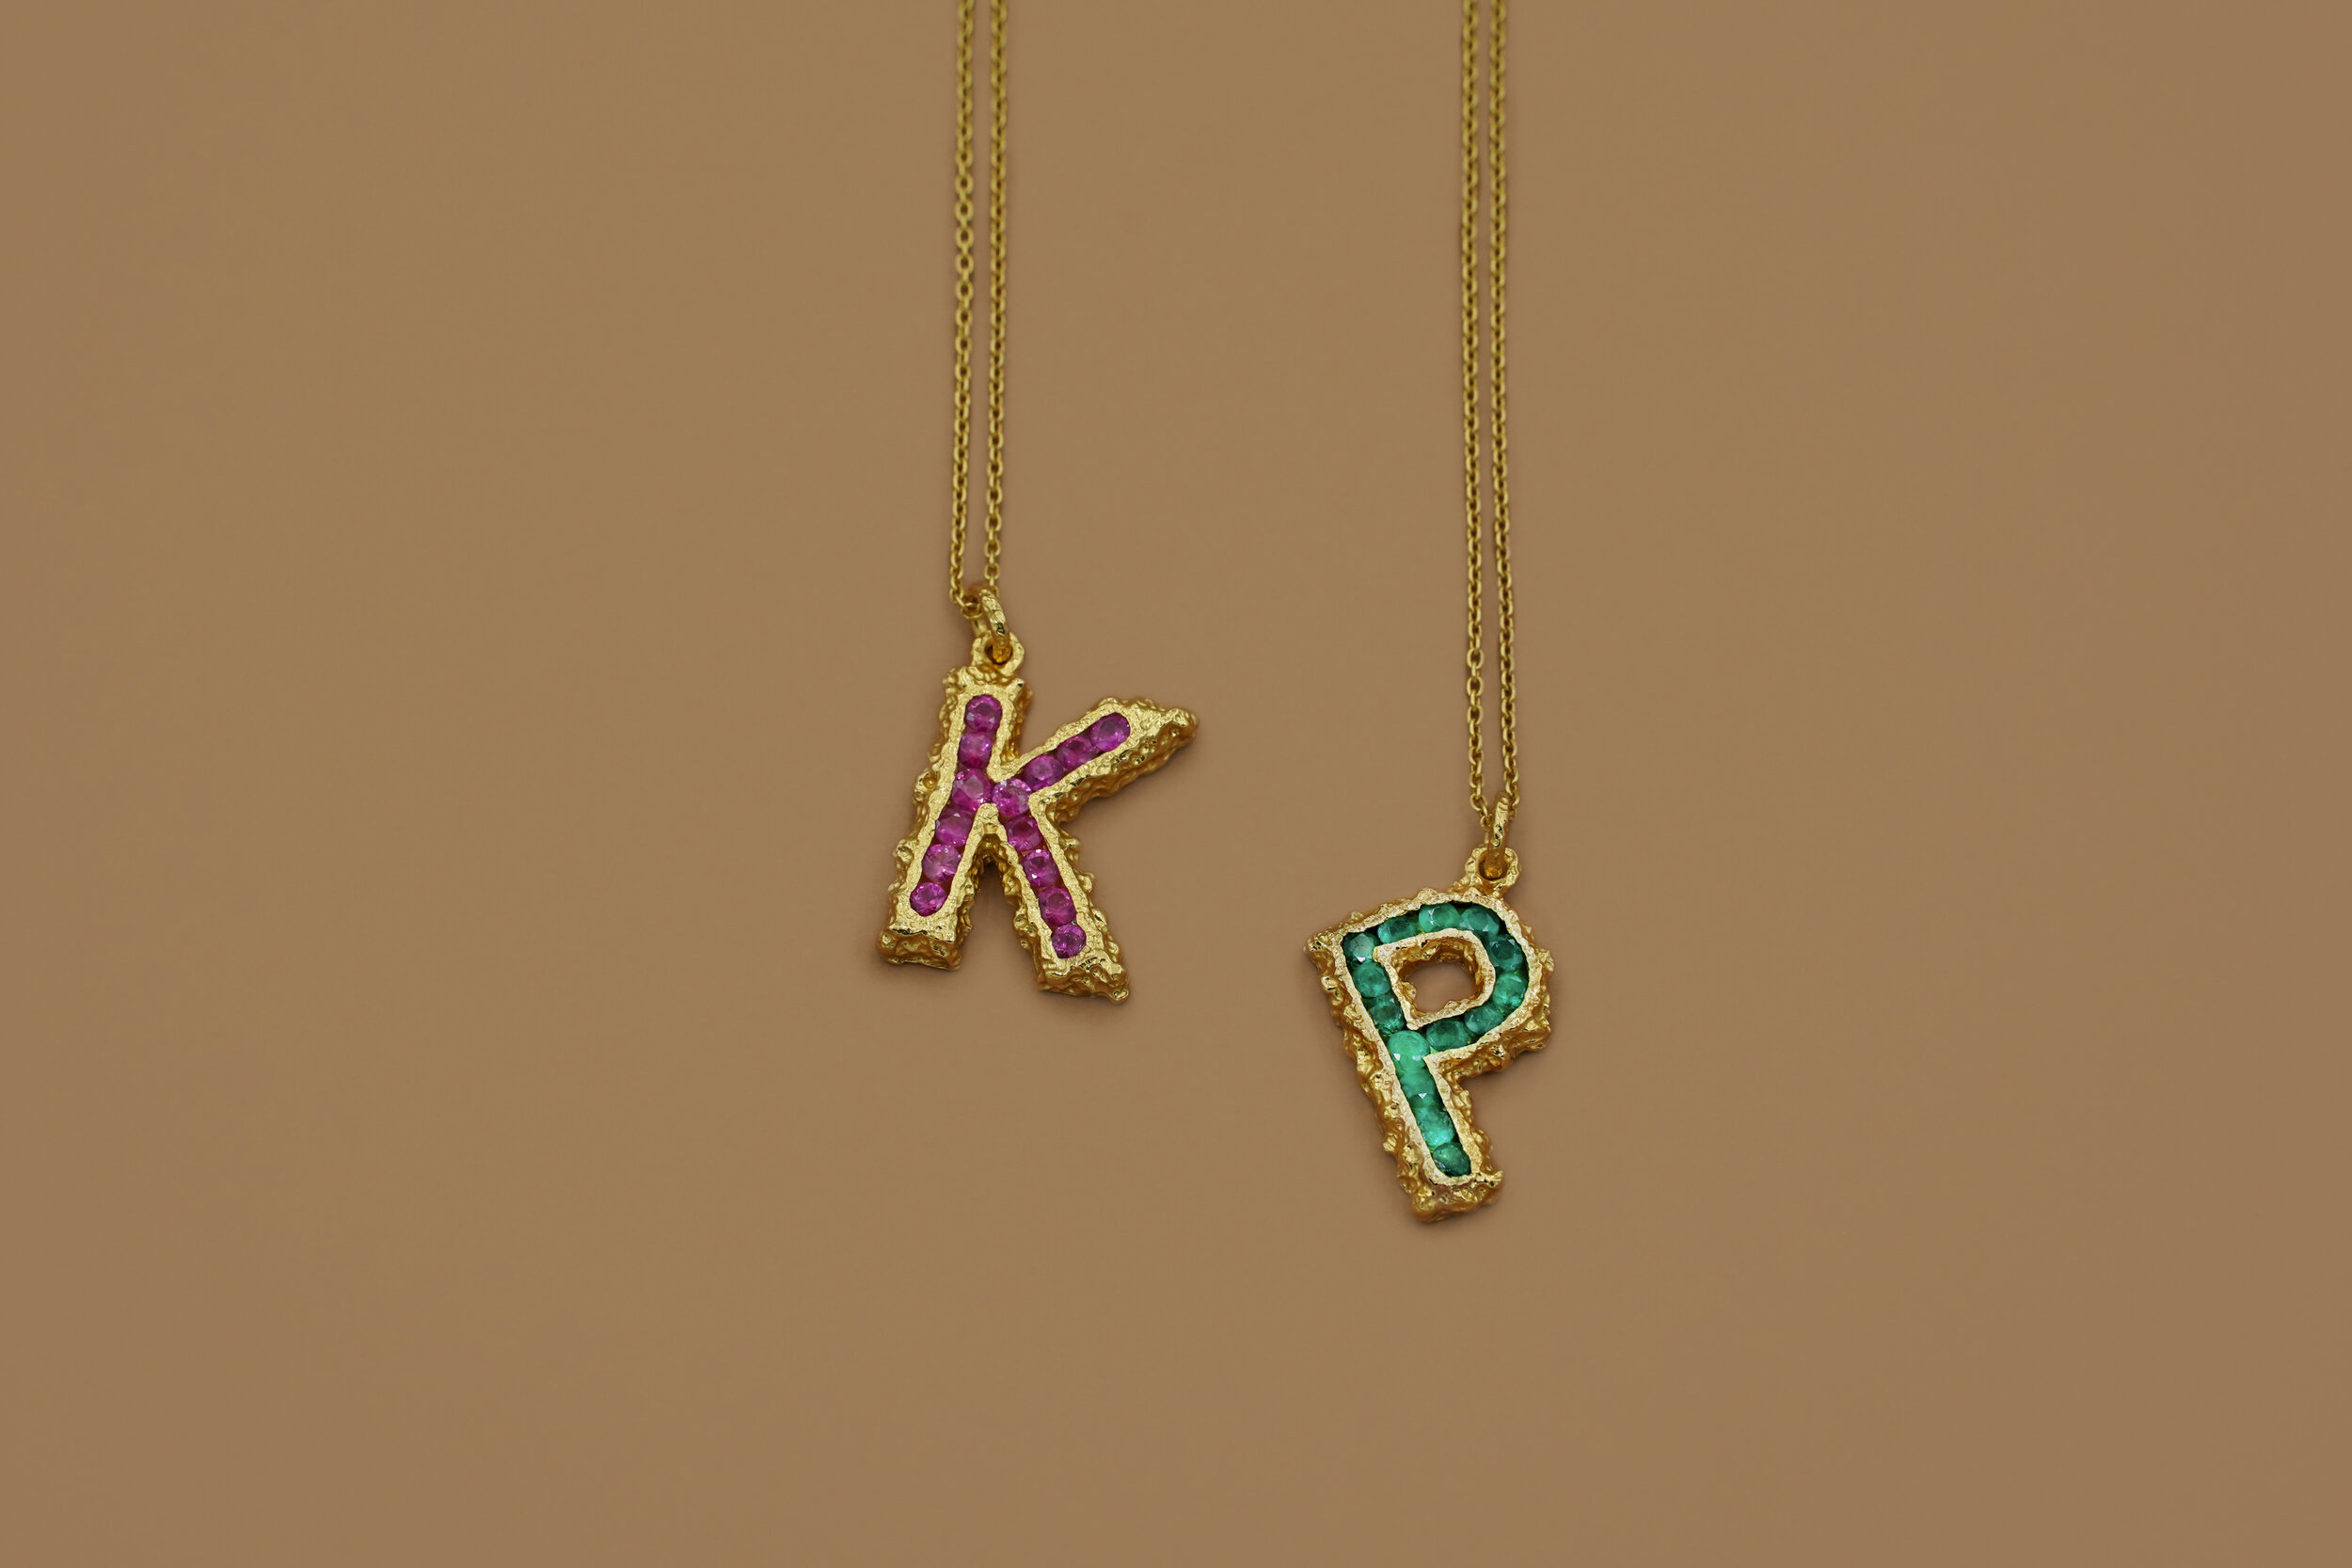 Pacharee Alphabet Gold-Plated Pearl Necklace